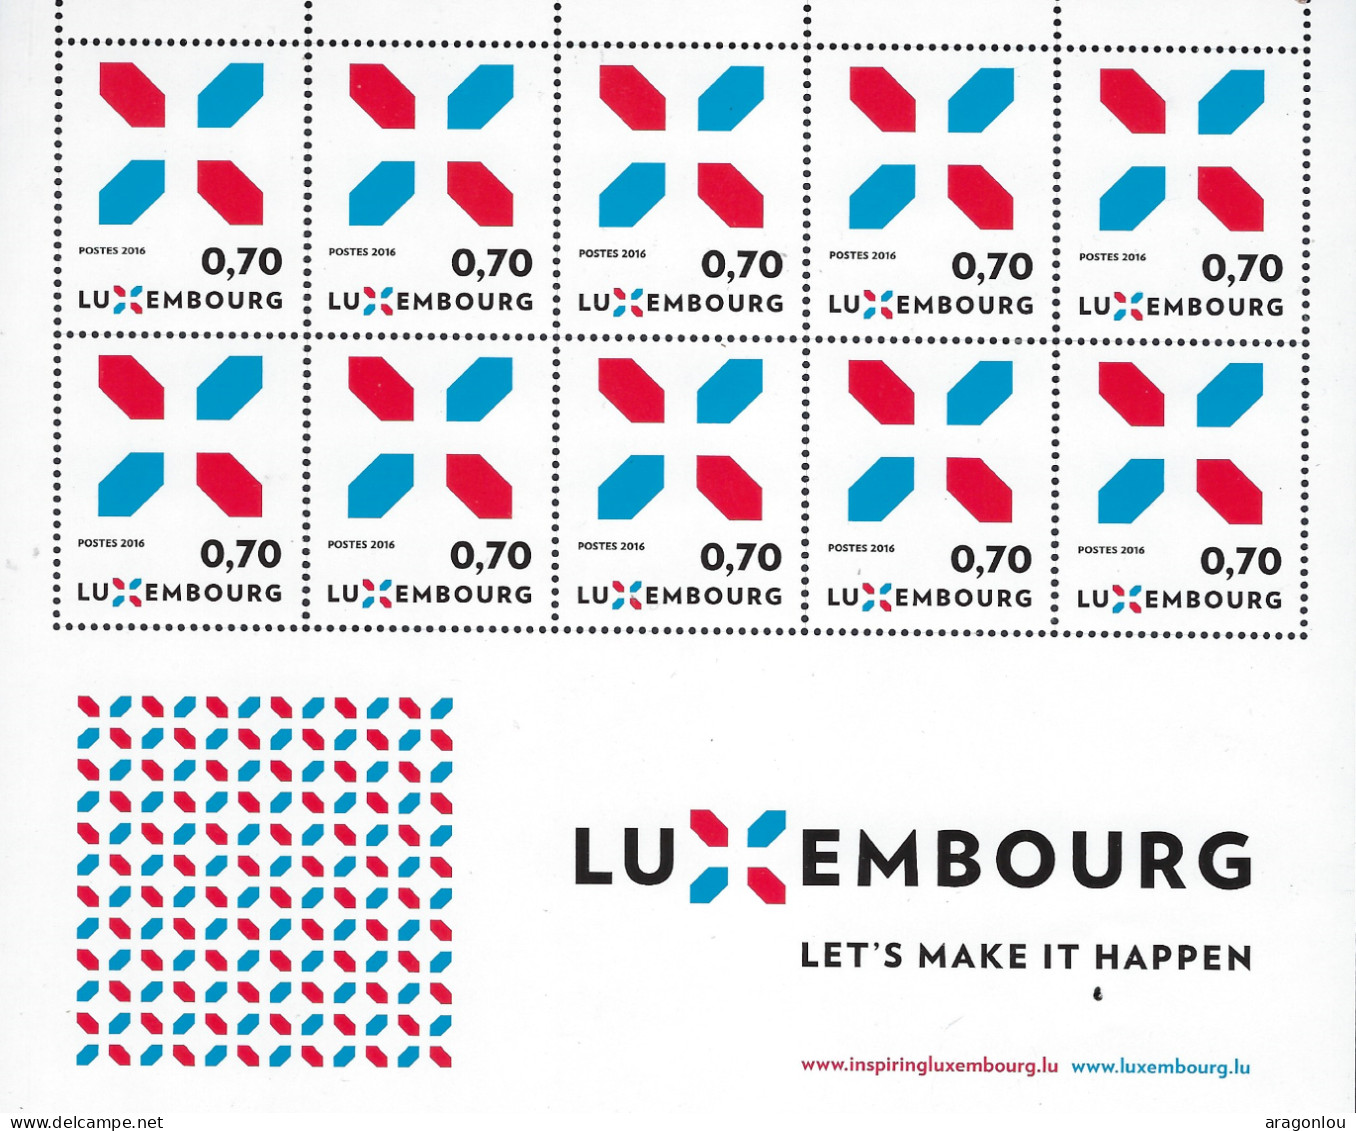 Luxembourg - Luxemburg - Timbres - Feuillet  à  10 Timbres X  0,70 -  2016  LUXEMBOURG  LET'S MAKE IT HAPPEN  MNH** - Blocs & Hojas